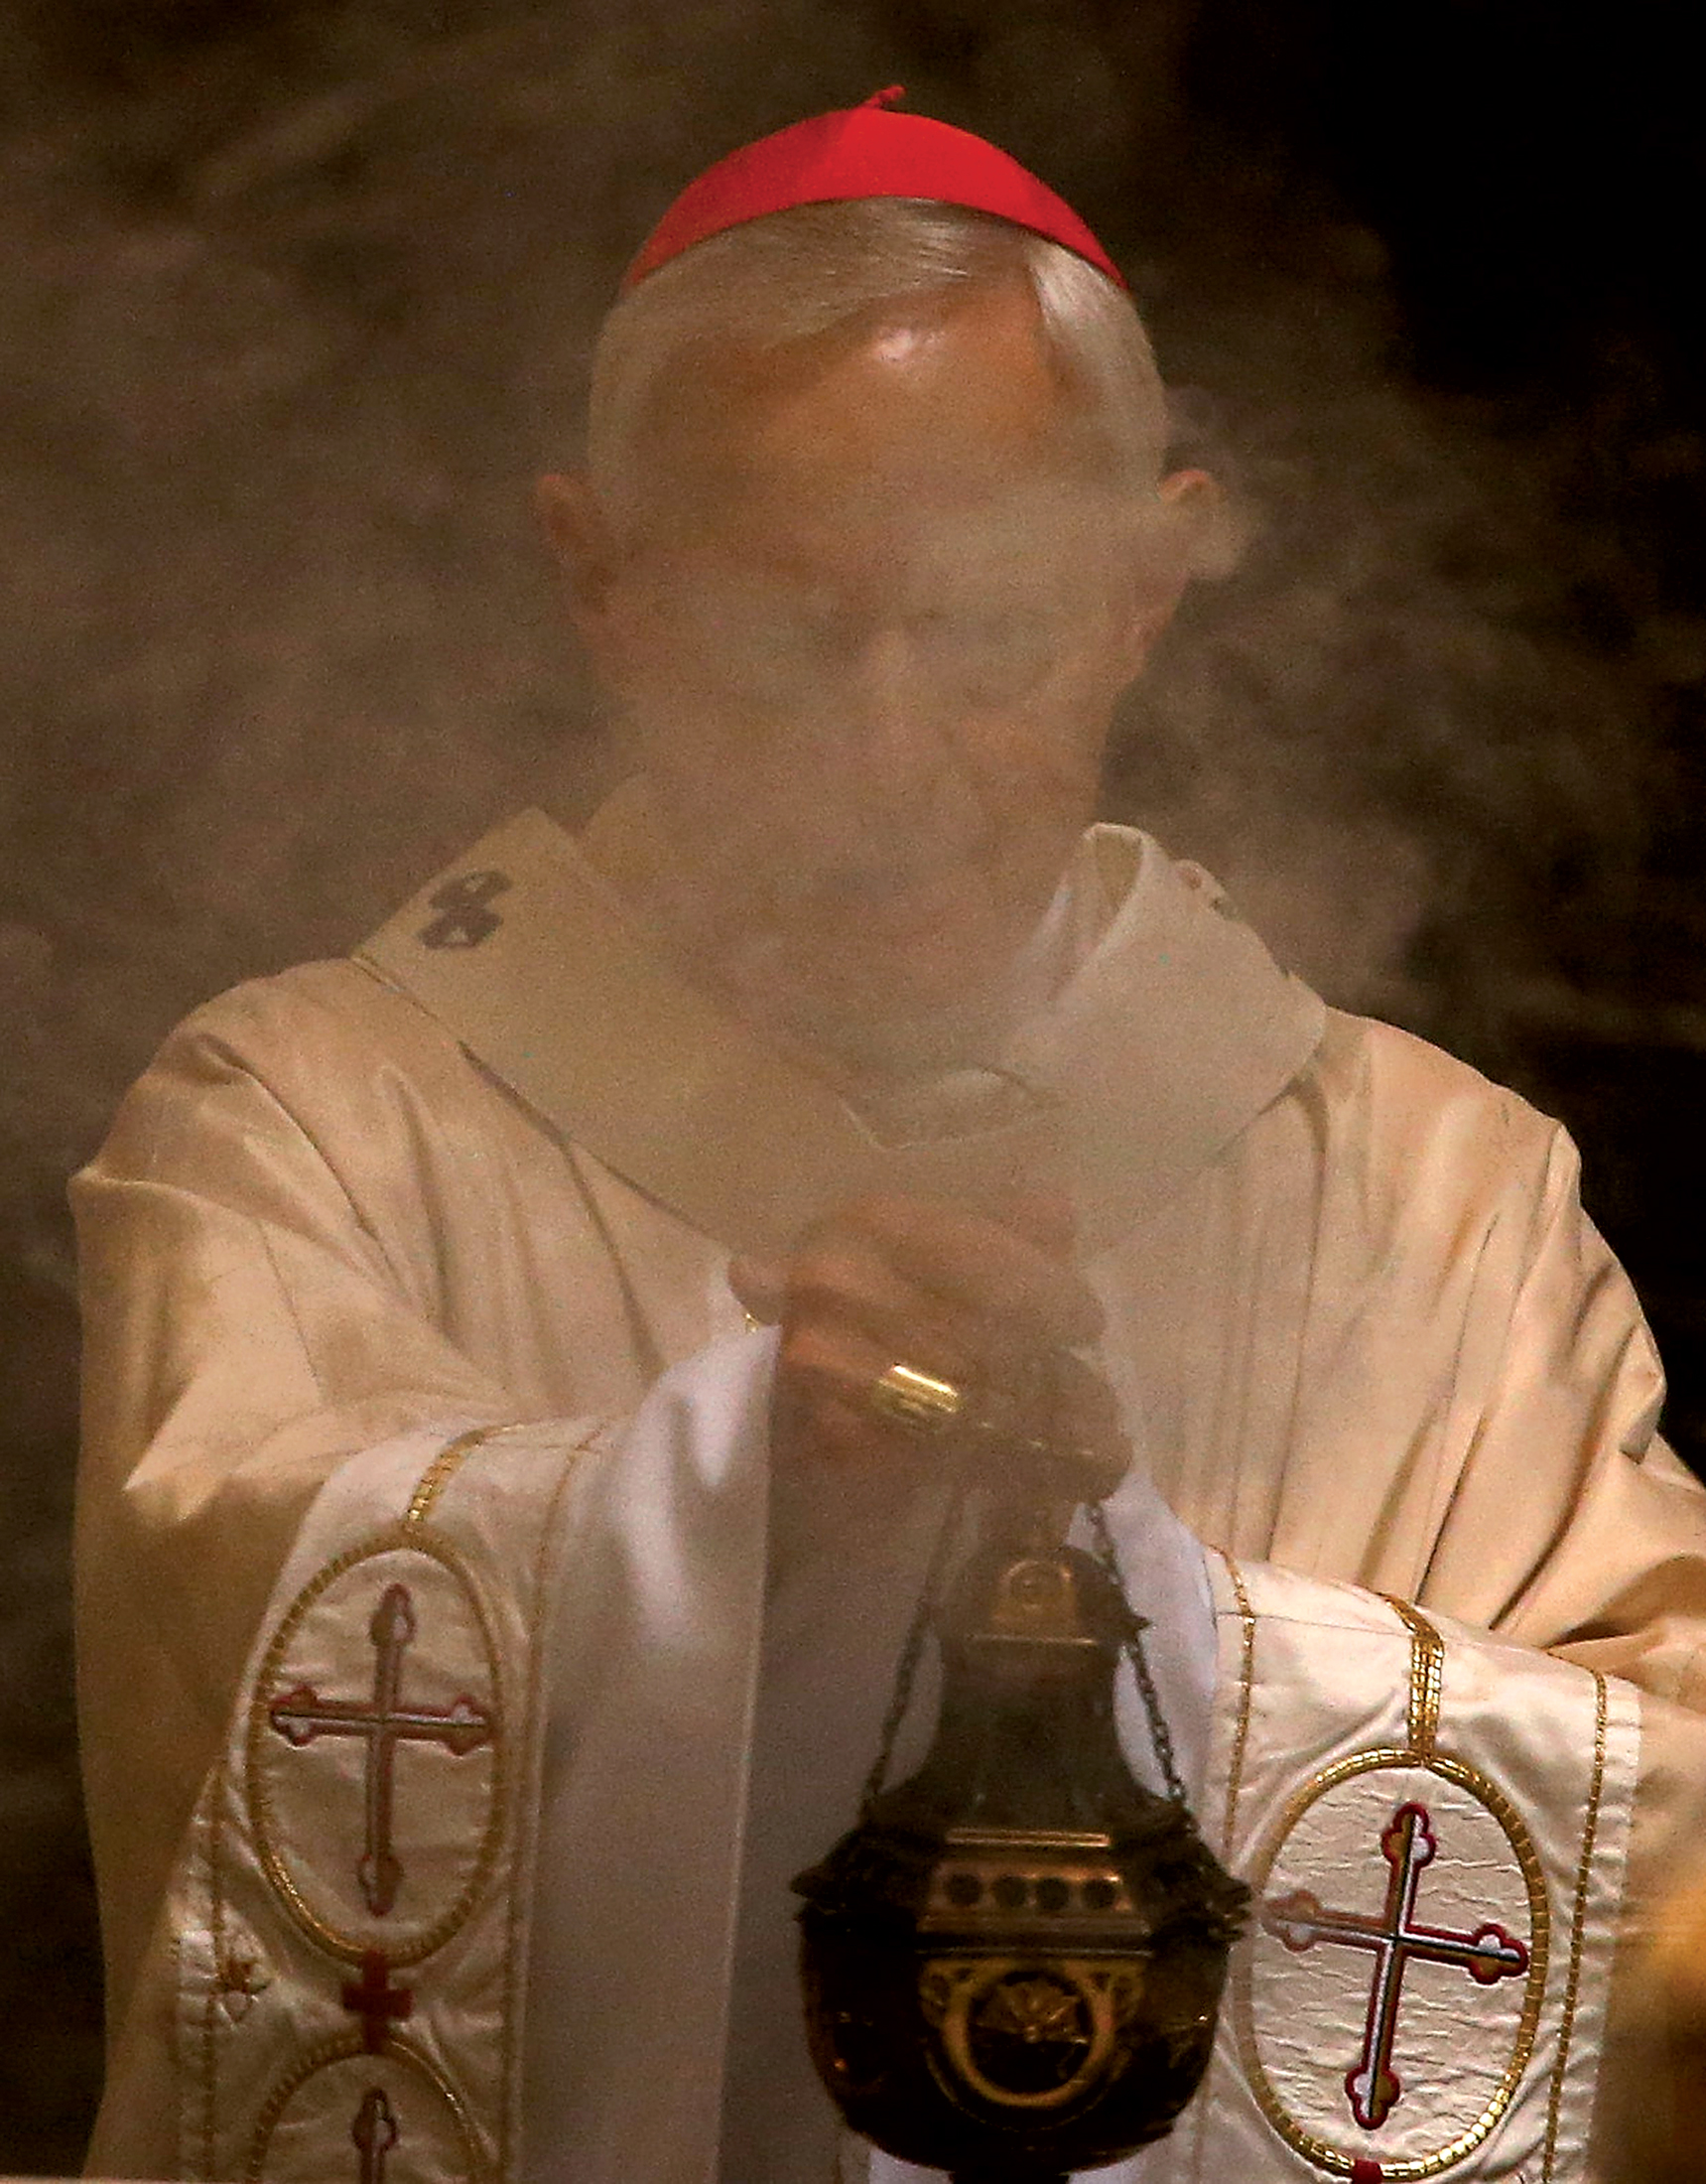 Cardinal Wuerl conducting Mass in DC. Photograph by Mark Wilson/Getty Images.